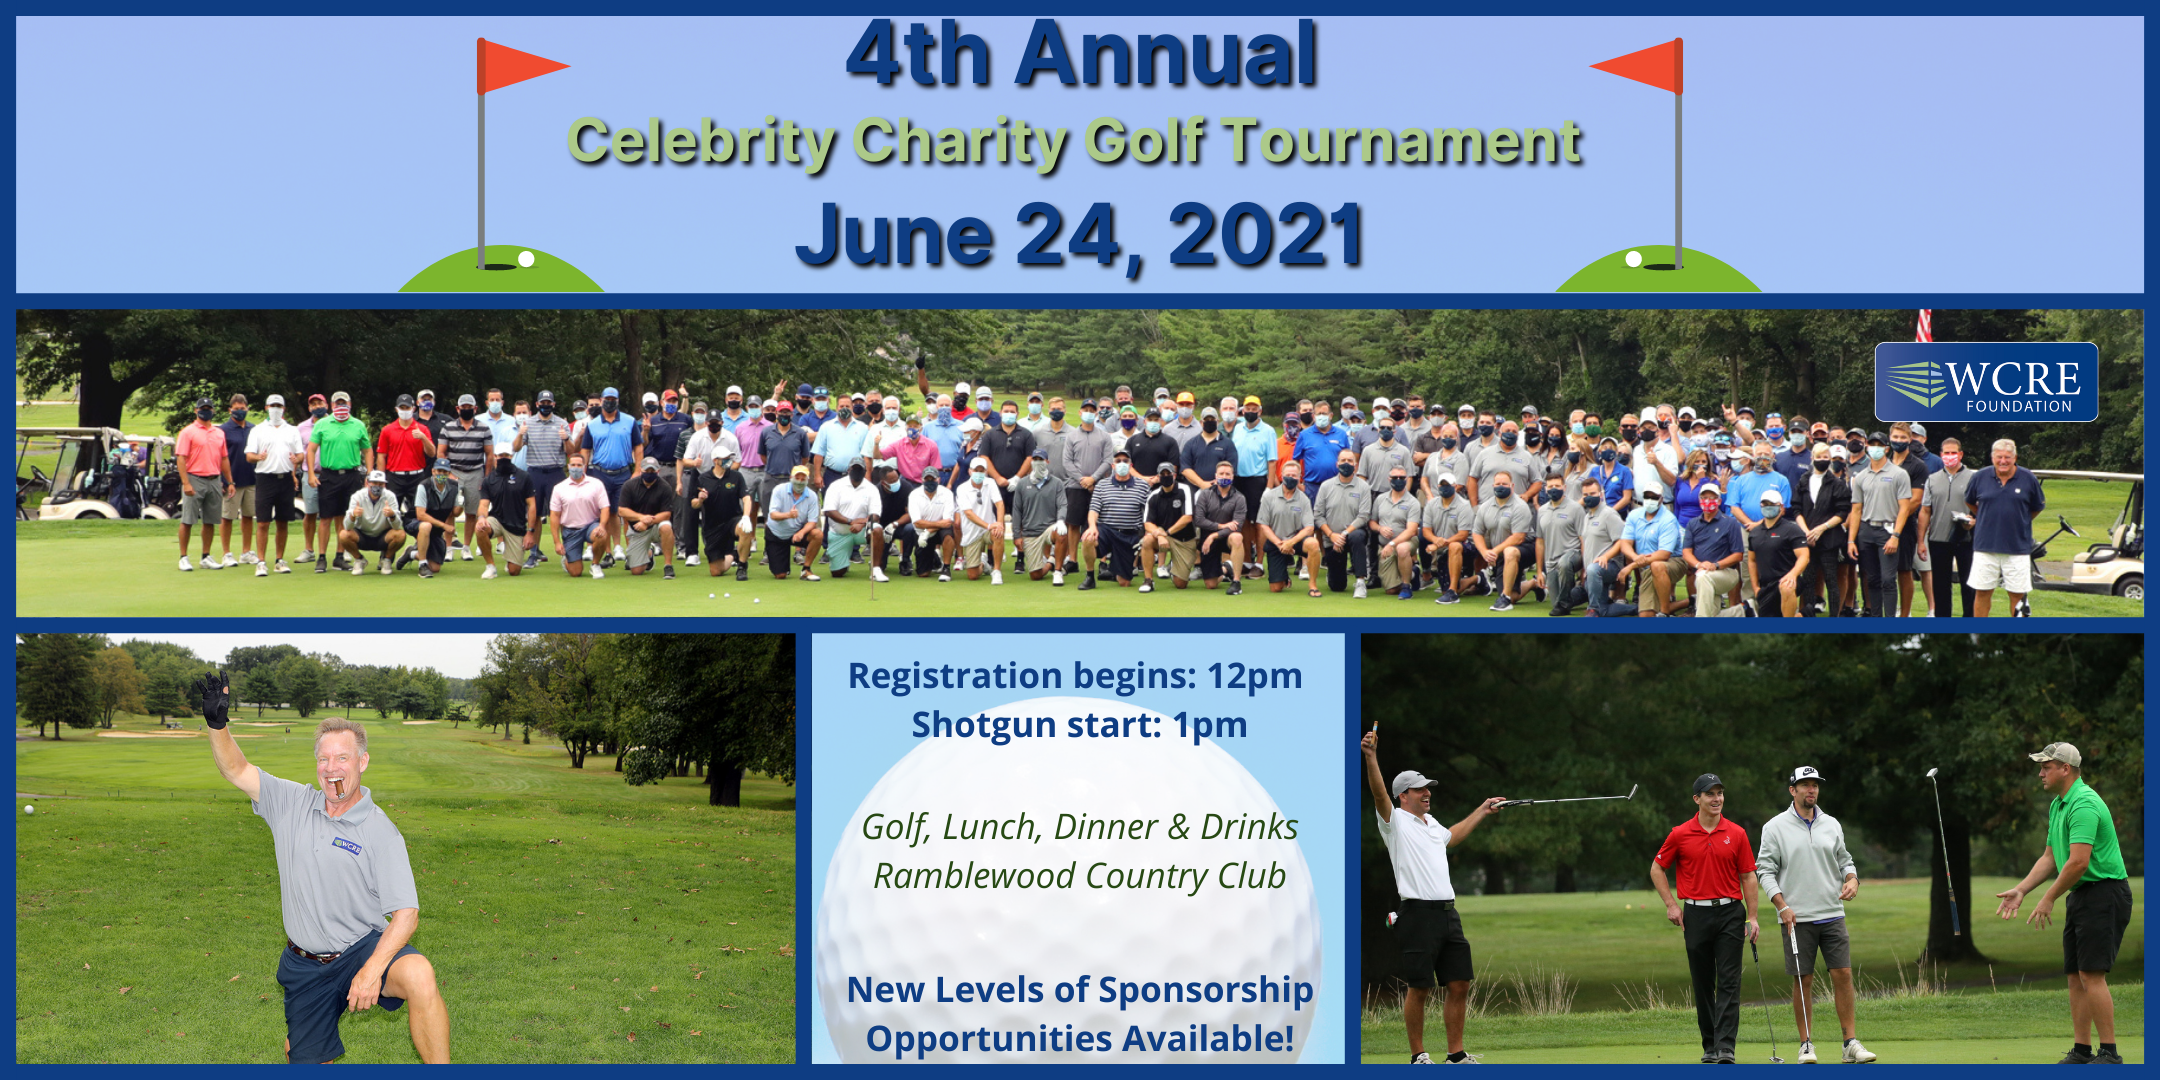 4th Annual Celebrity Charity Golf Tournament